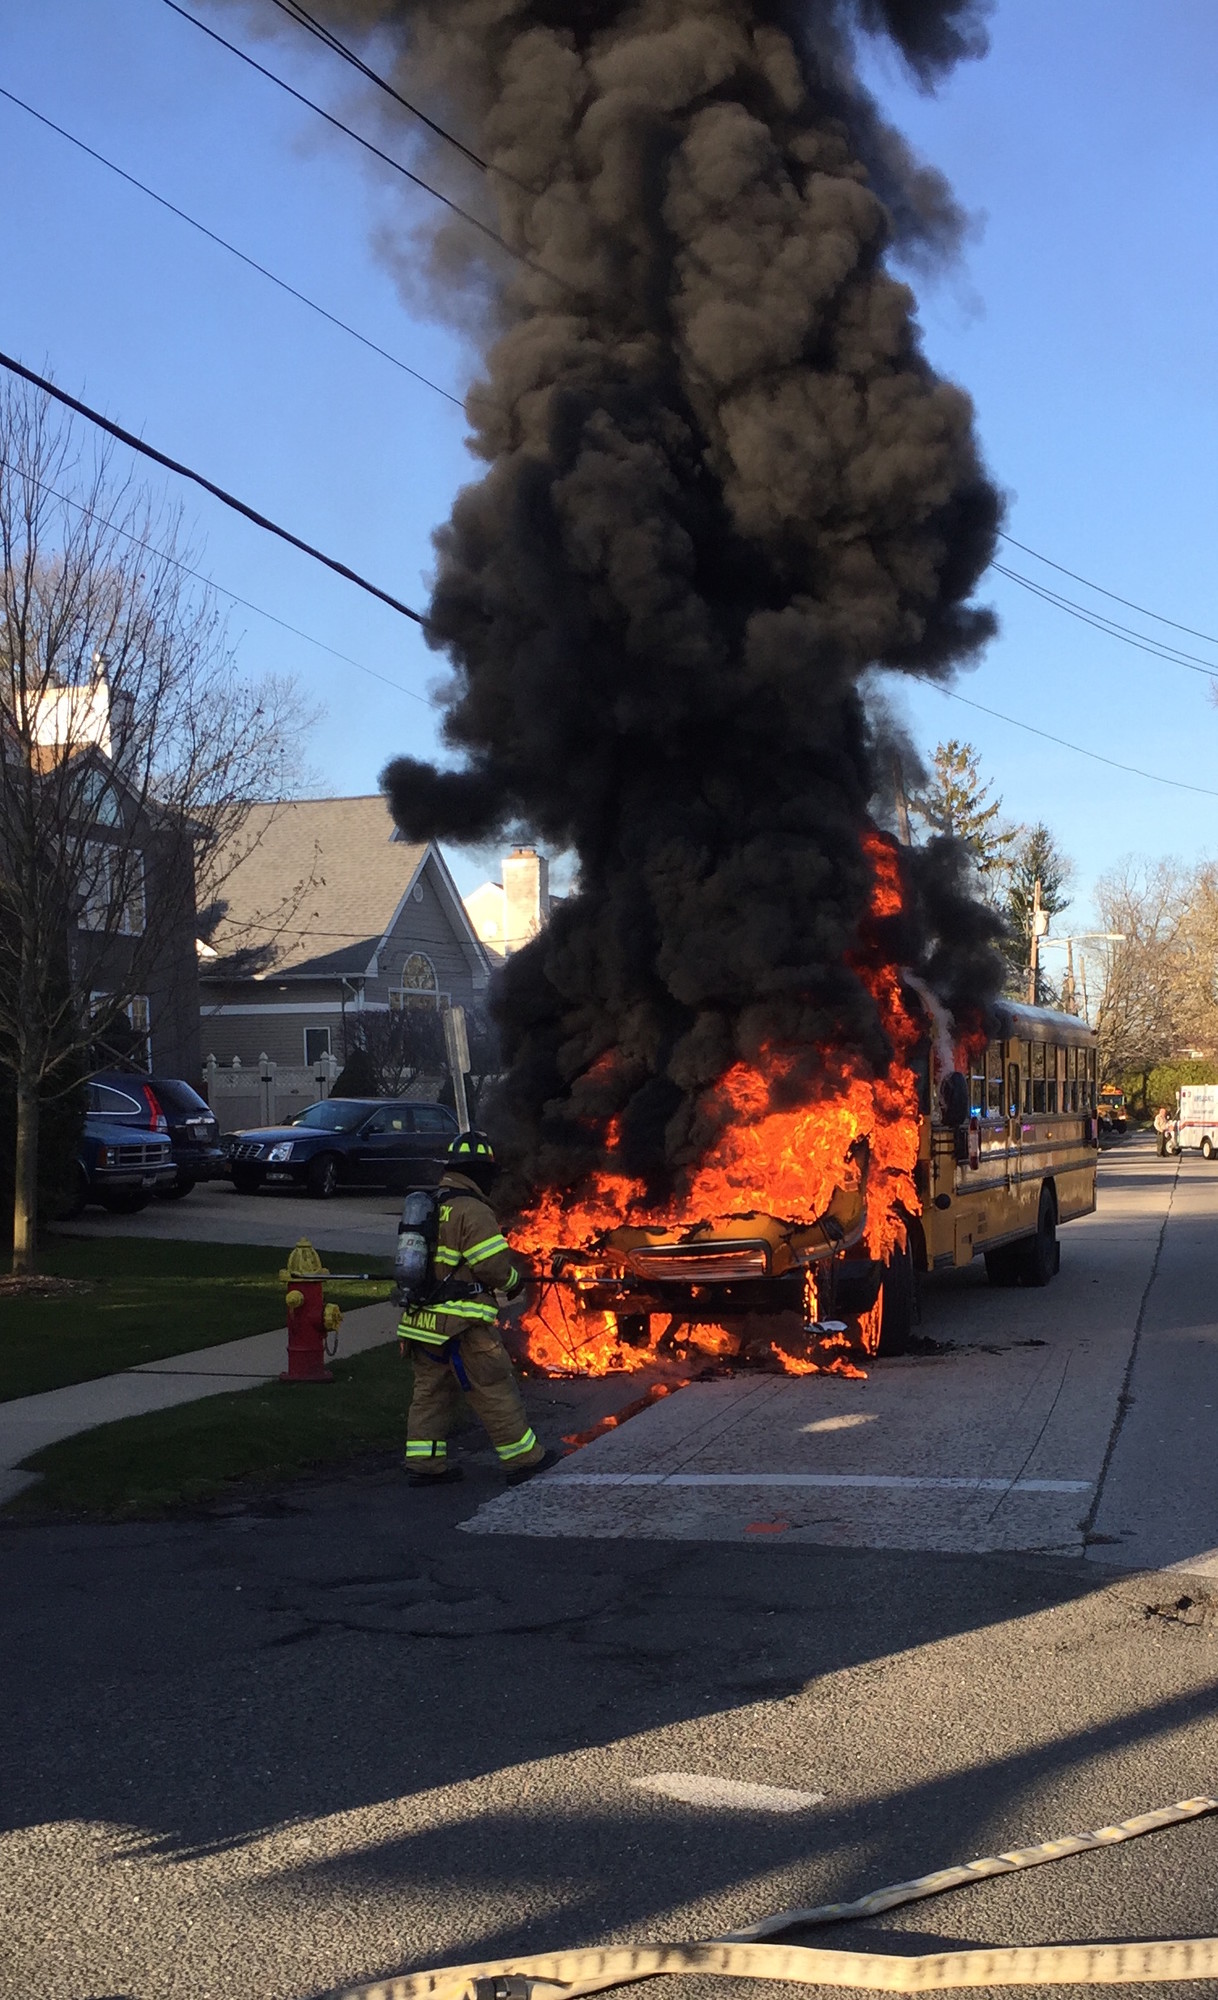 A school bus headed to Merrick Avenue Middle School suddenly caught fire and burst into flames on Kirkwood Avenue in Merrick on April 6. Photo courtesy Ron Luparello/Merrick F.D.